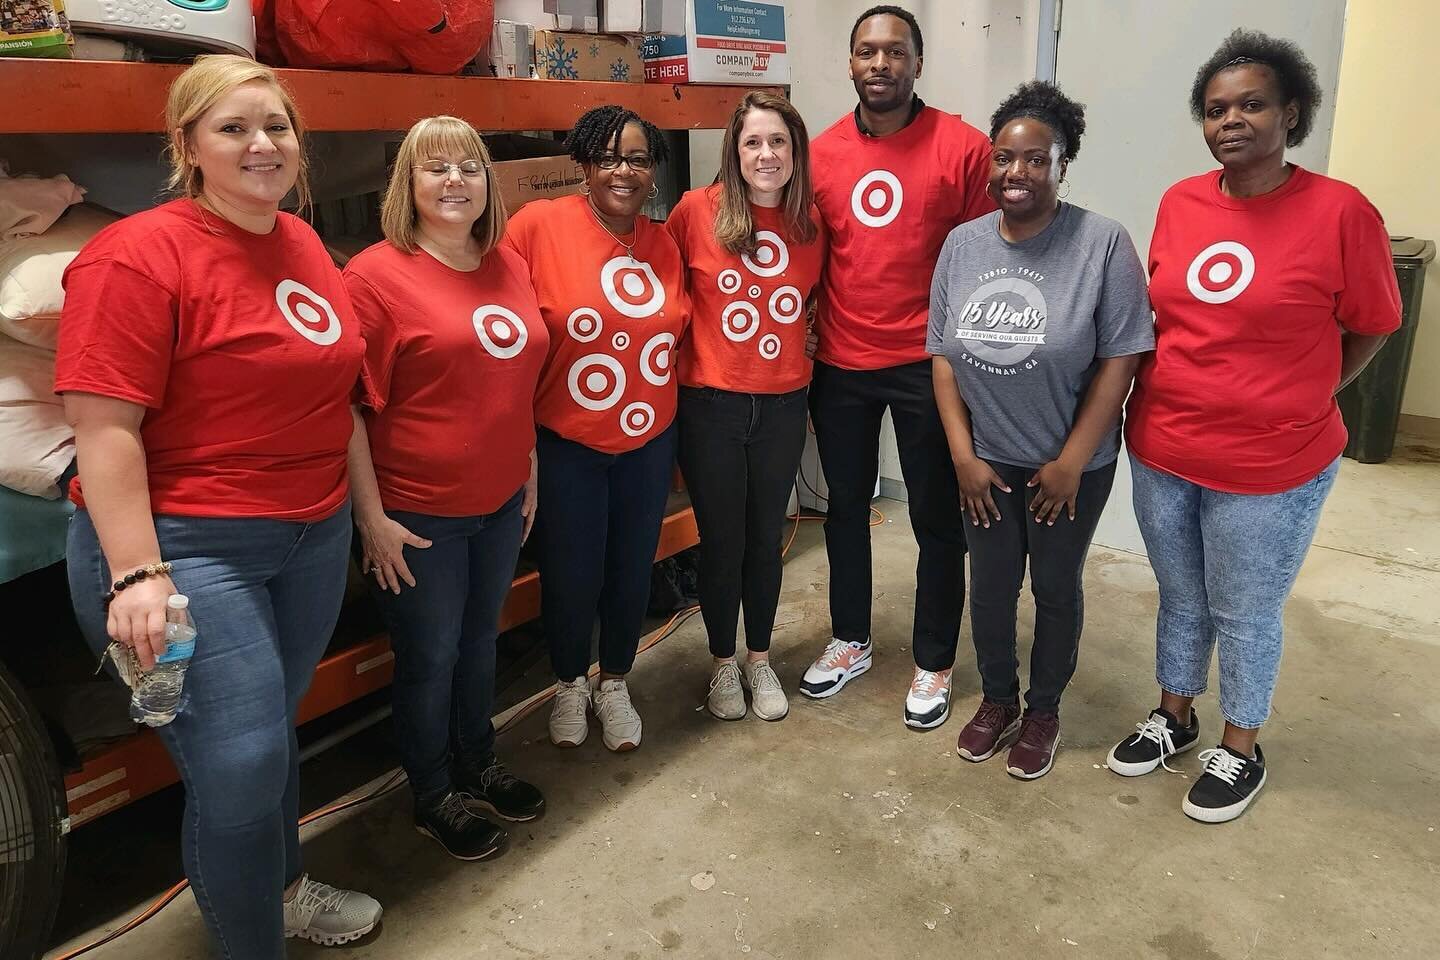 Heartfelt thanks to this Target team for their invaluable assistance in organizing the warehouse space behind our Clothing Closet. Your support is deeply appreciated.